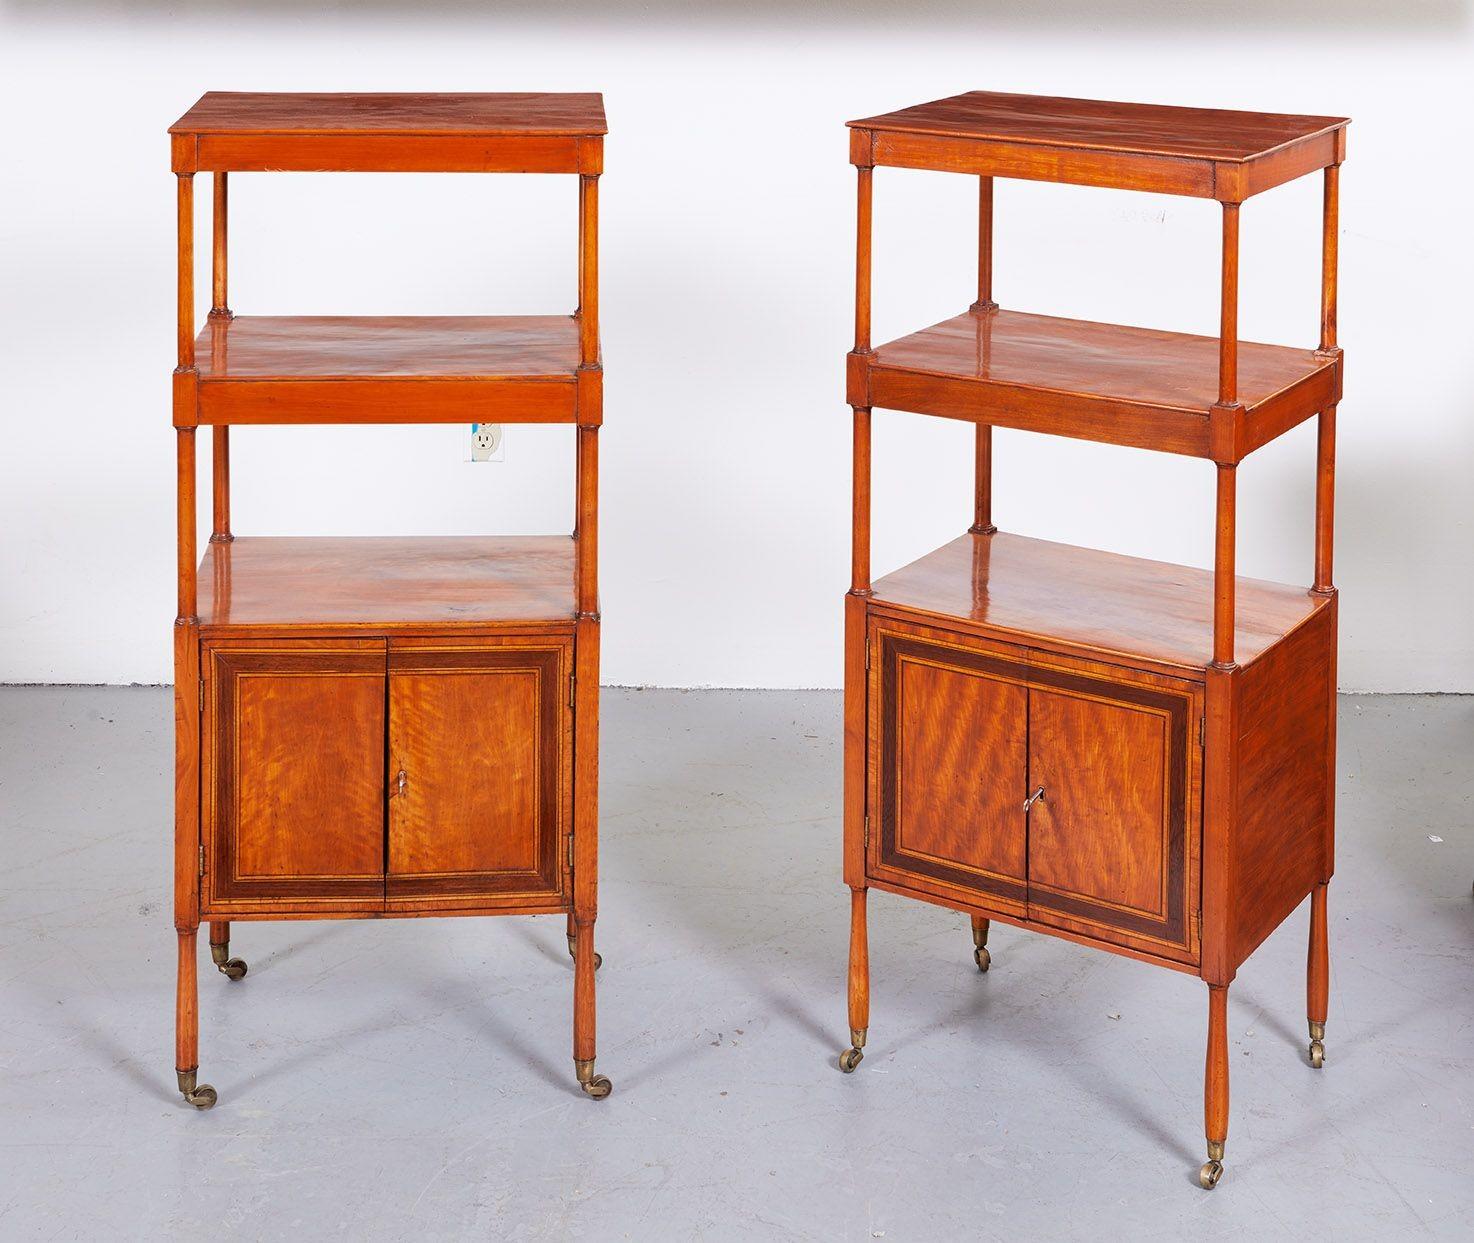 European A Rare Pair of 18th c. English Satinwood Etageres For Sale